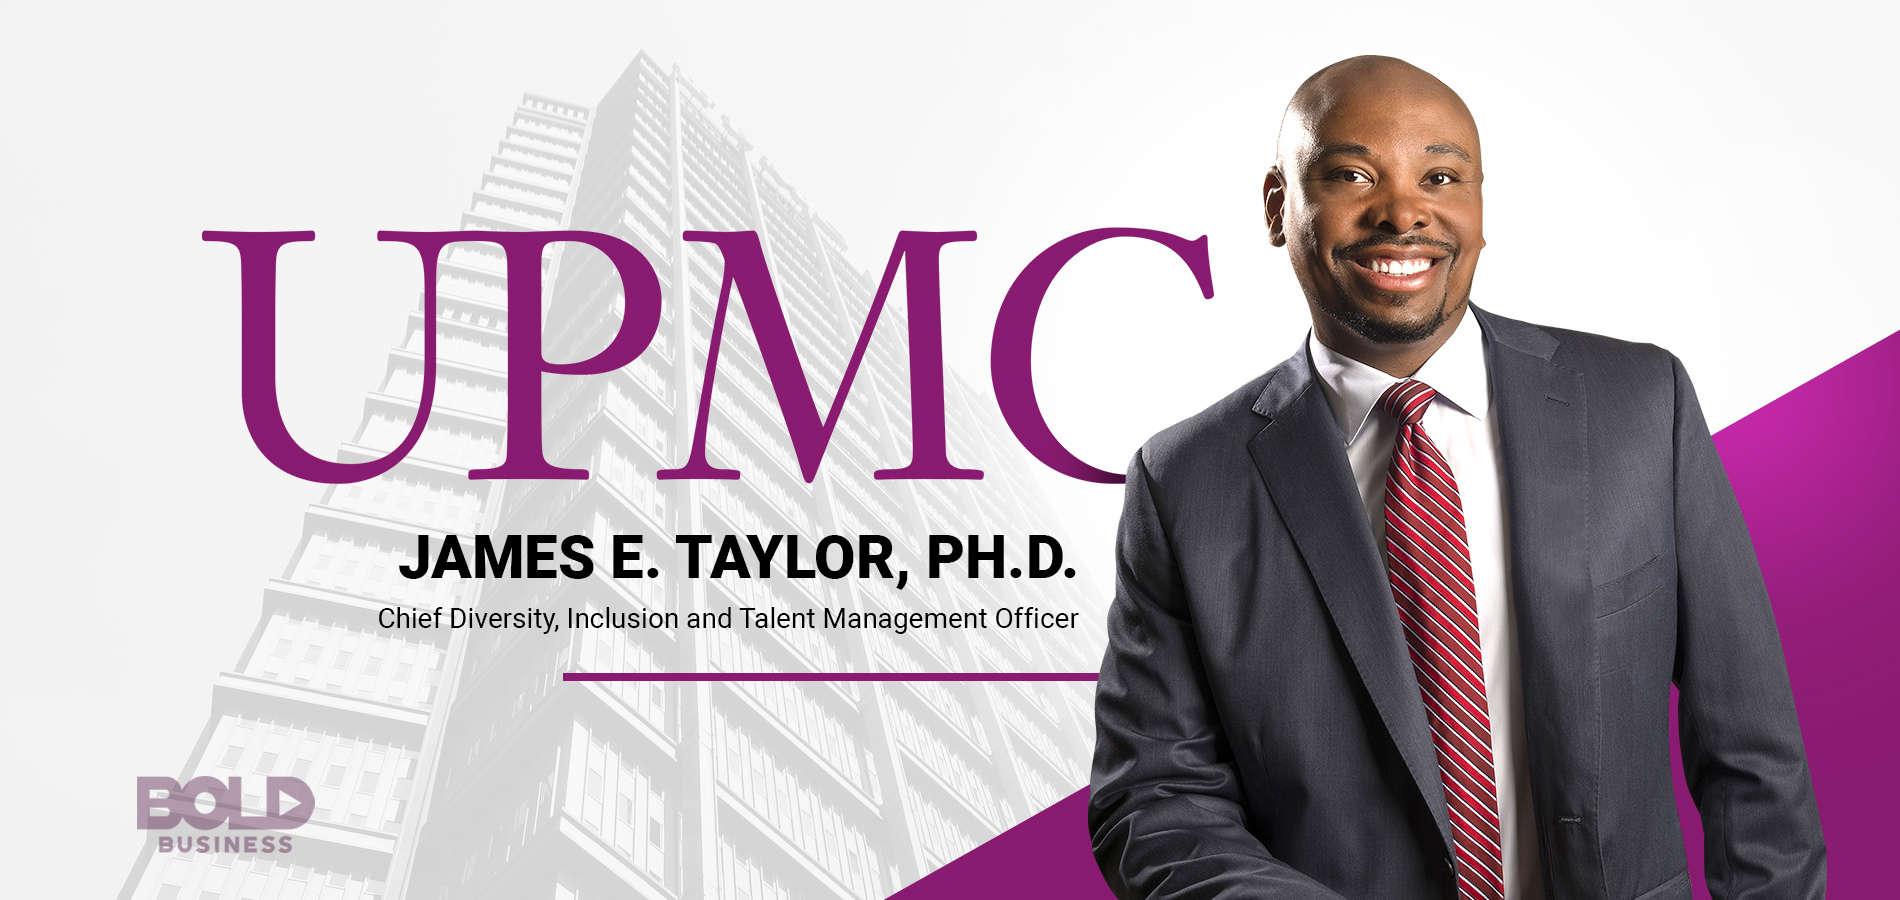 a photo of James E. Taylor, Ph.D., Chief Diversity Officer and Inclusion and Talent Manager, UPMC